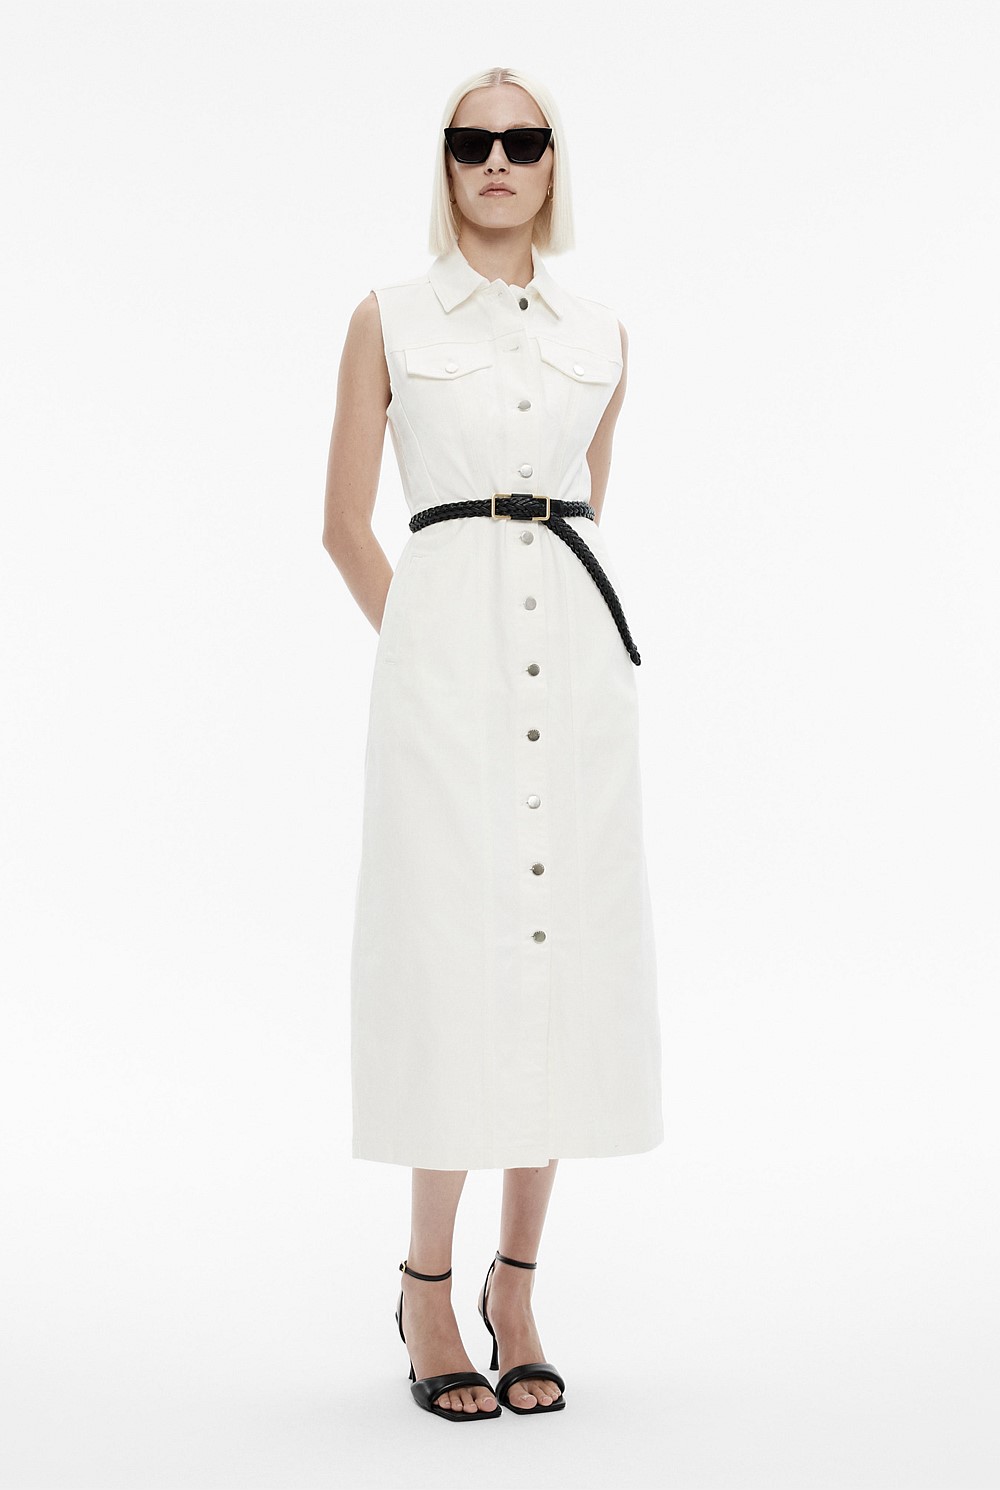 Shop White Dresses for Women Online - Witchery